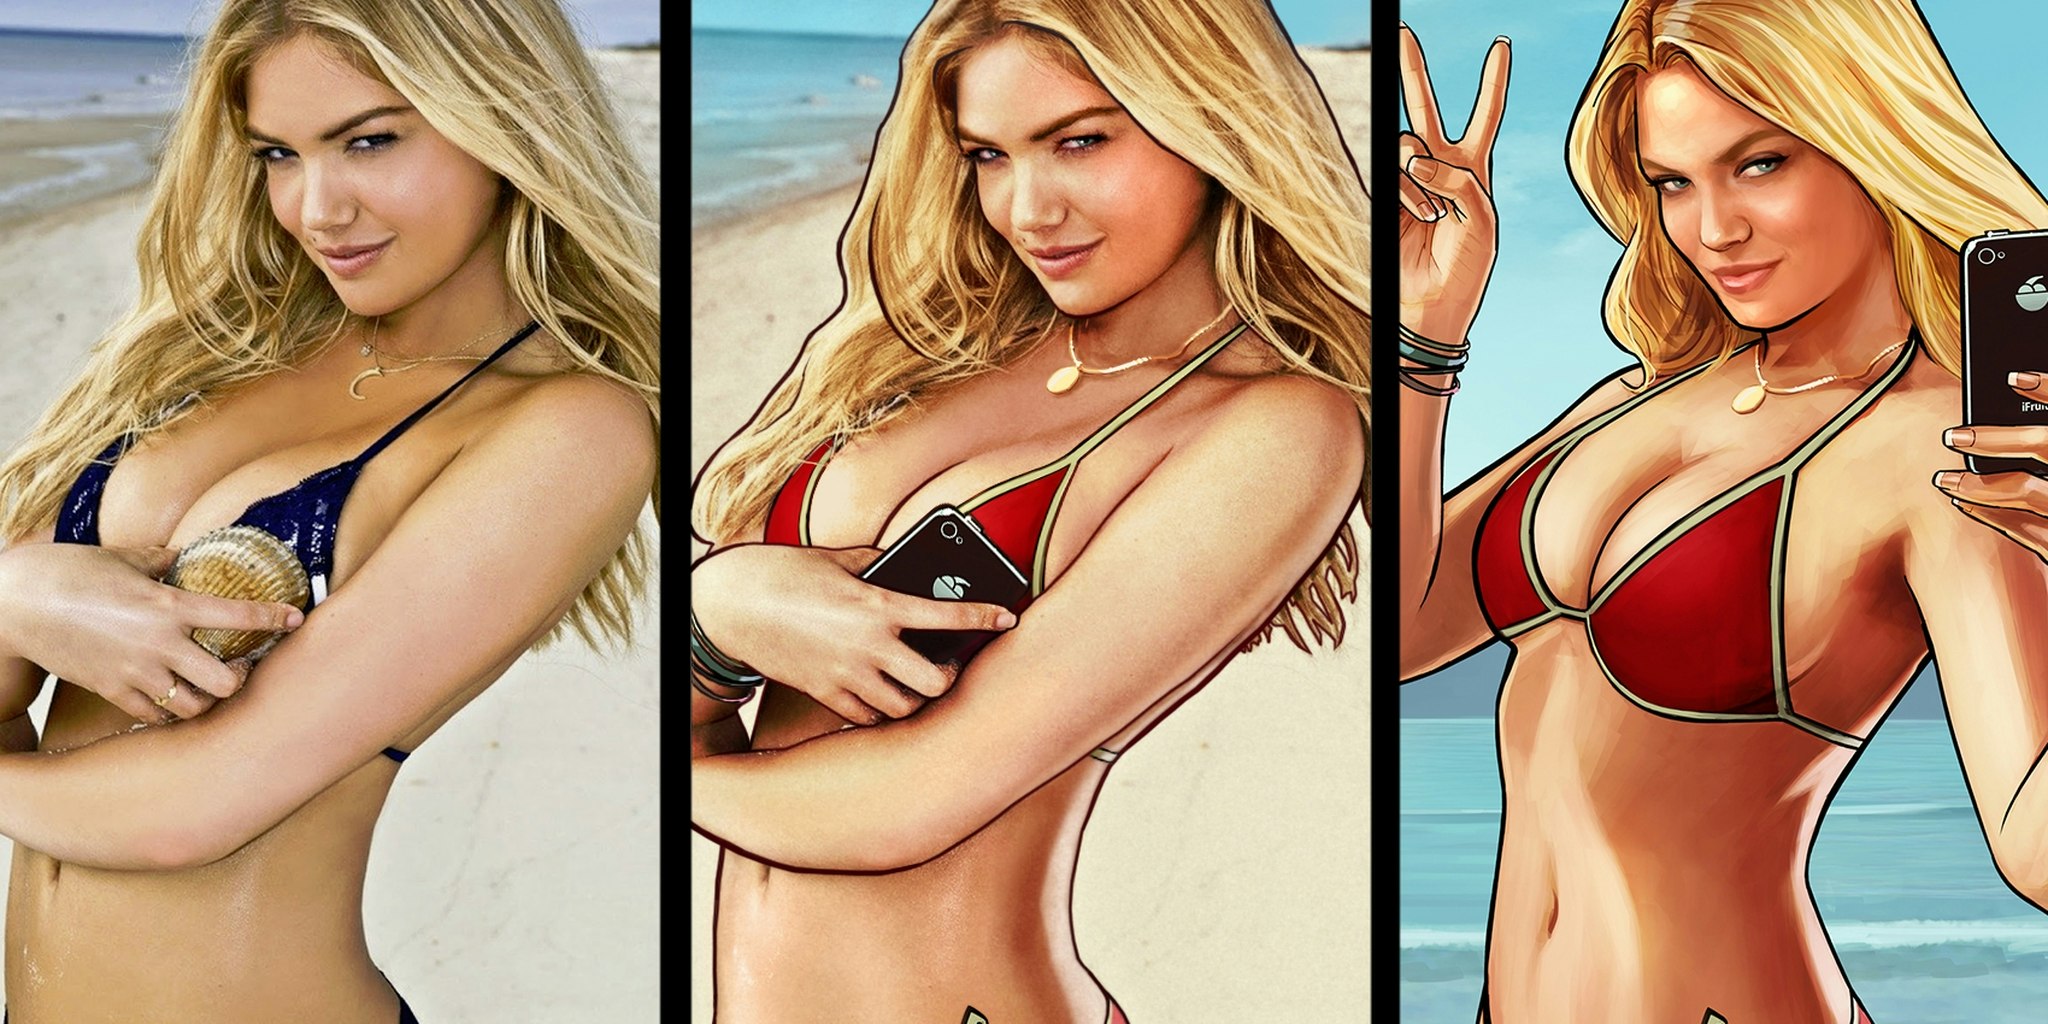 Thats not Kate Upton in the Grand Theft Auto V ads—its this model photo